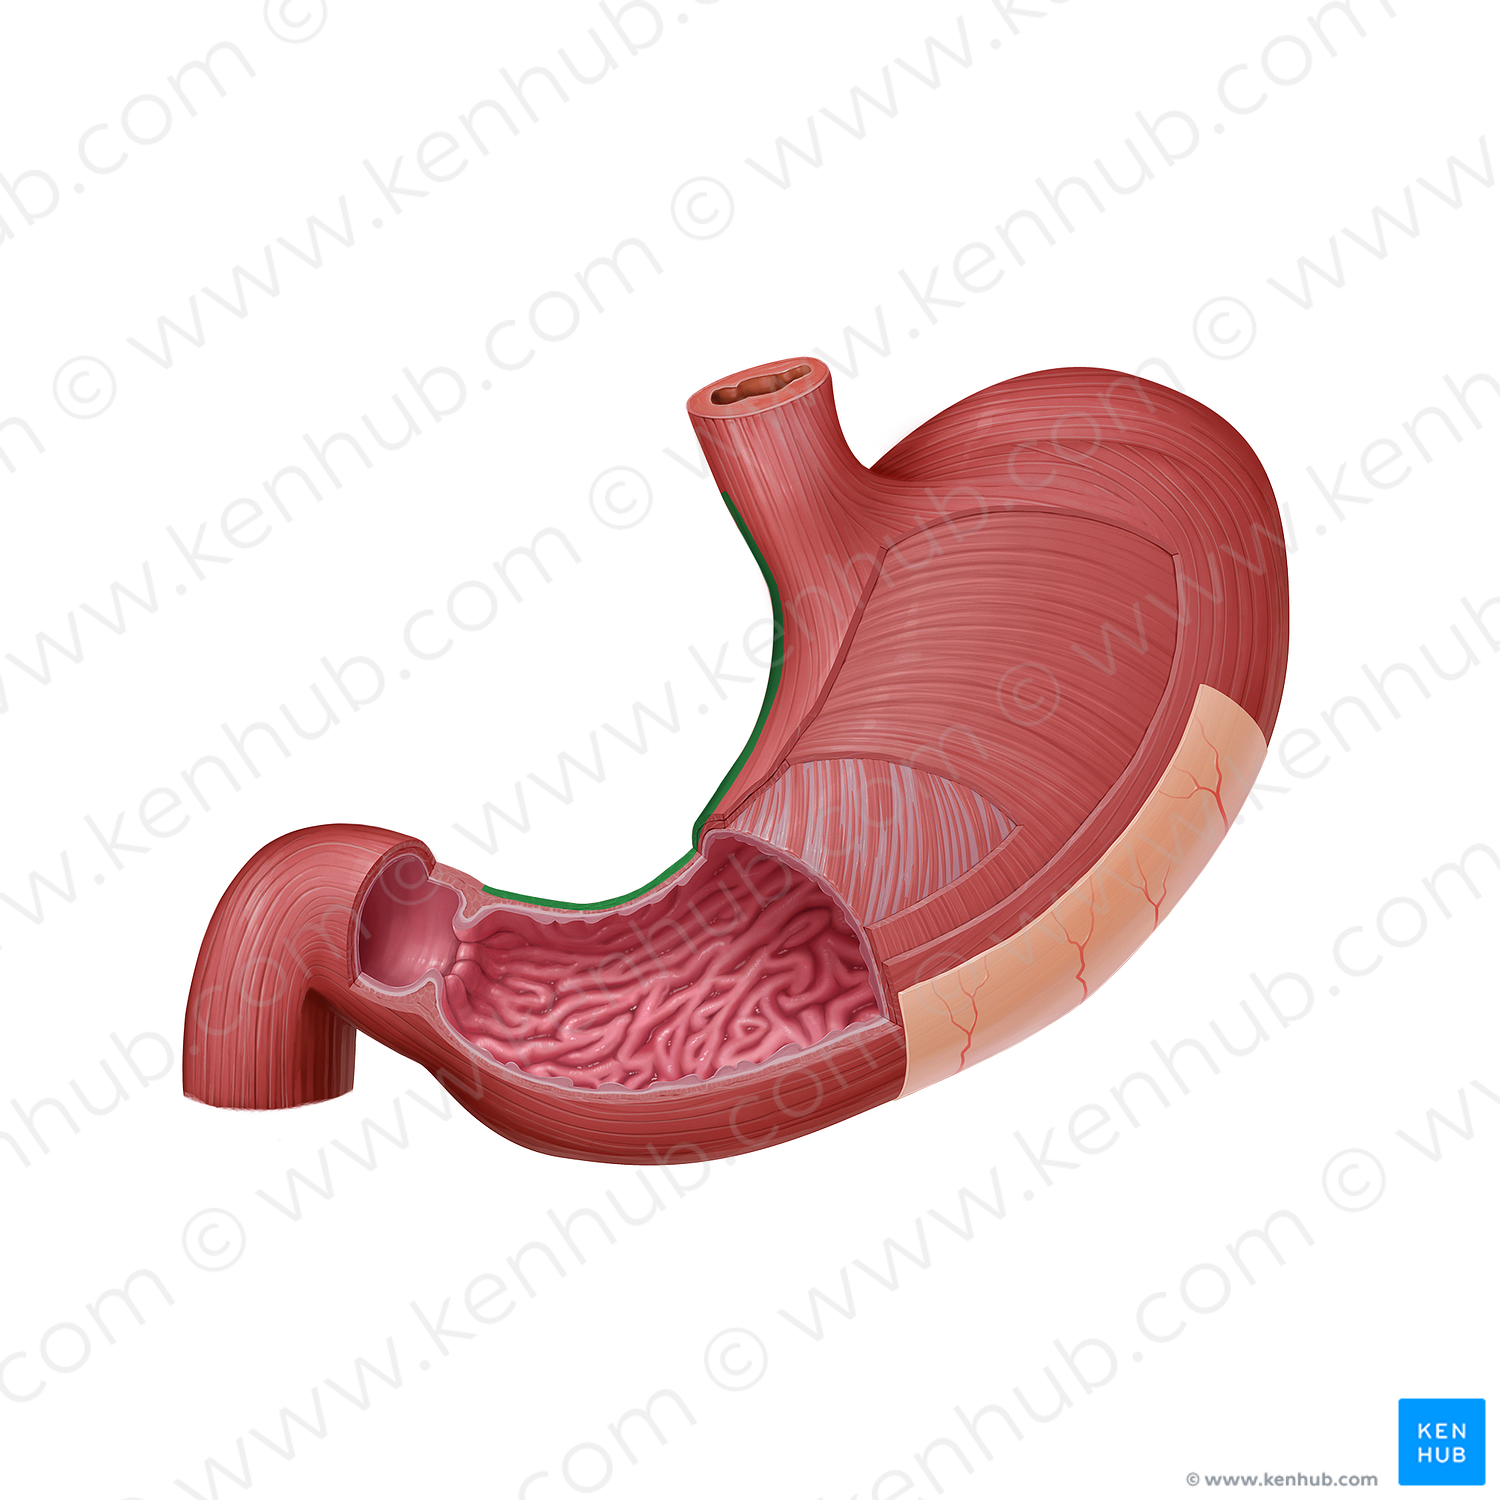 Lesser curvature of stomach (#21588)